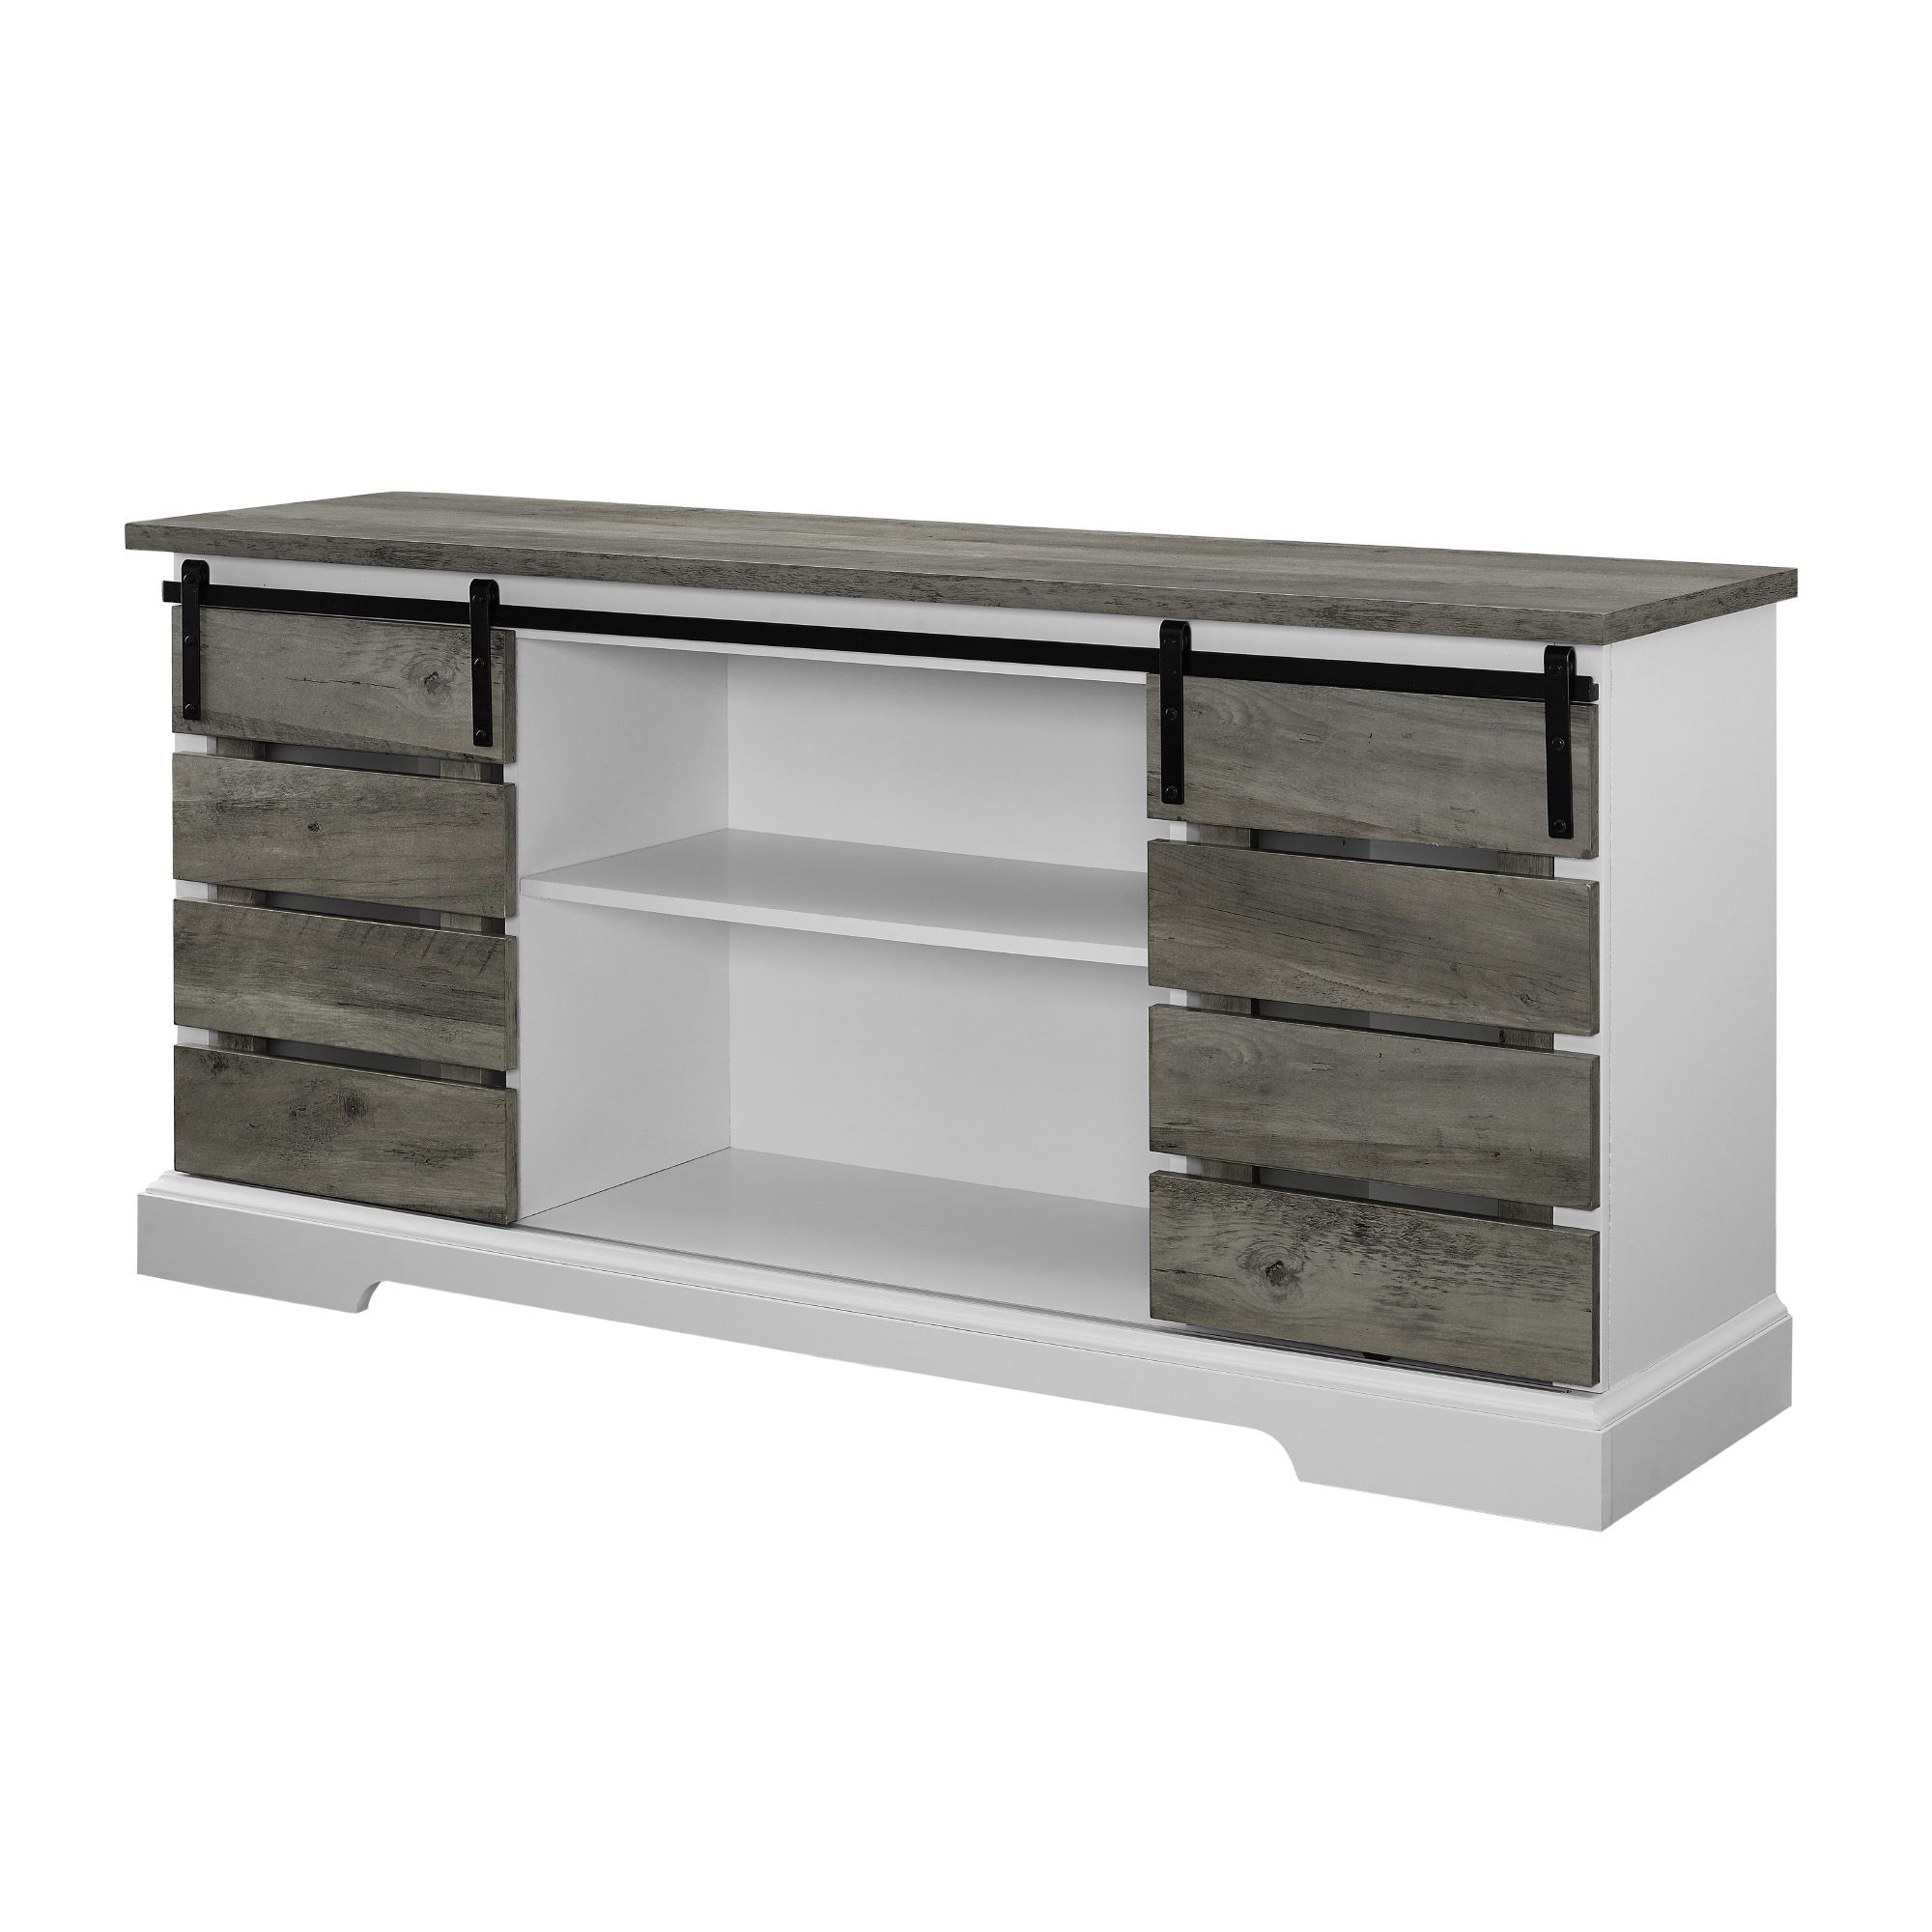 Woven Paths Sliding Slat Door Tv Stand For Tv's Up To 64 For Woven Paths Farmhouse Sliding Barn Door Tv Stands With Multiple Finishes (View 1 of 14)